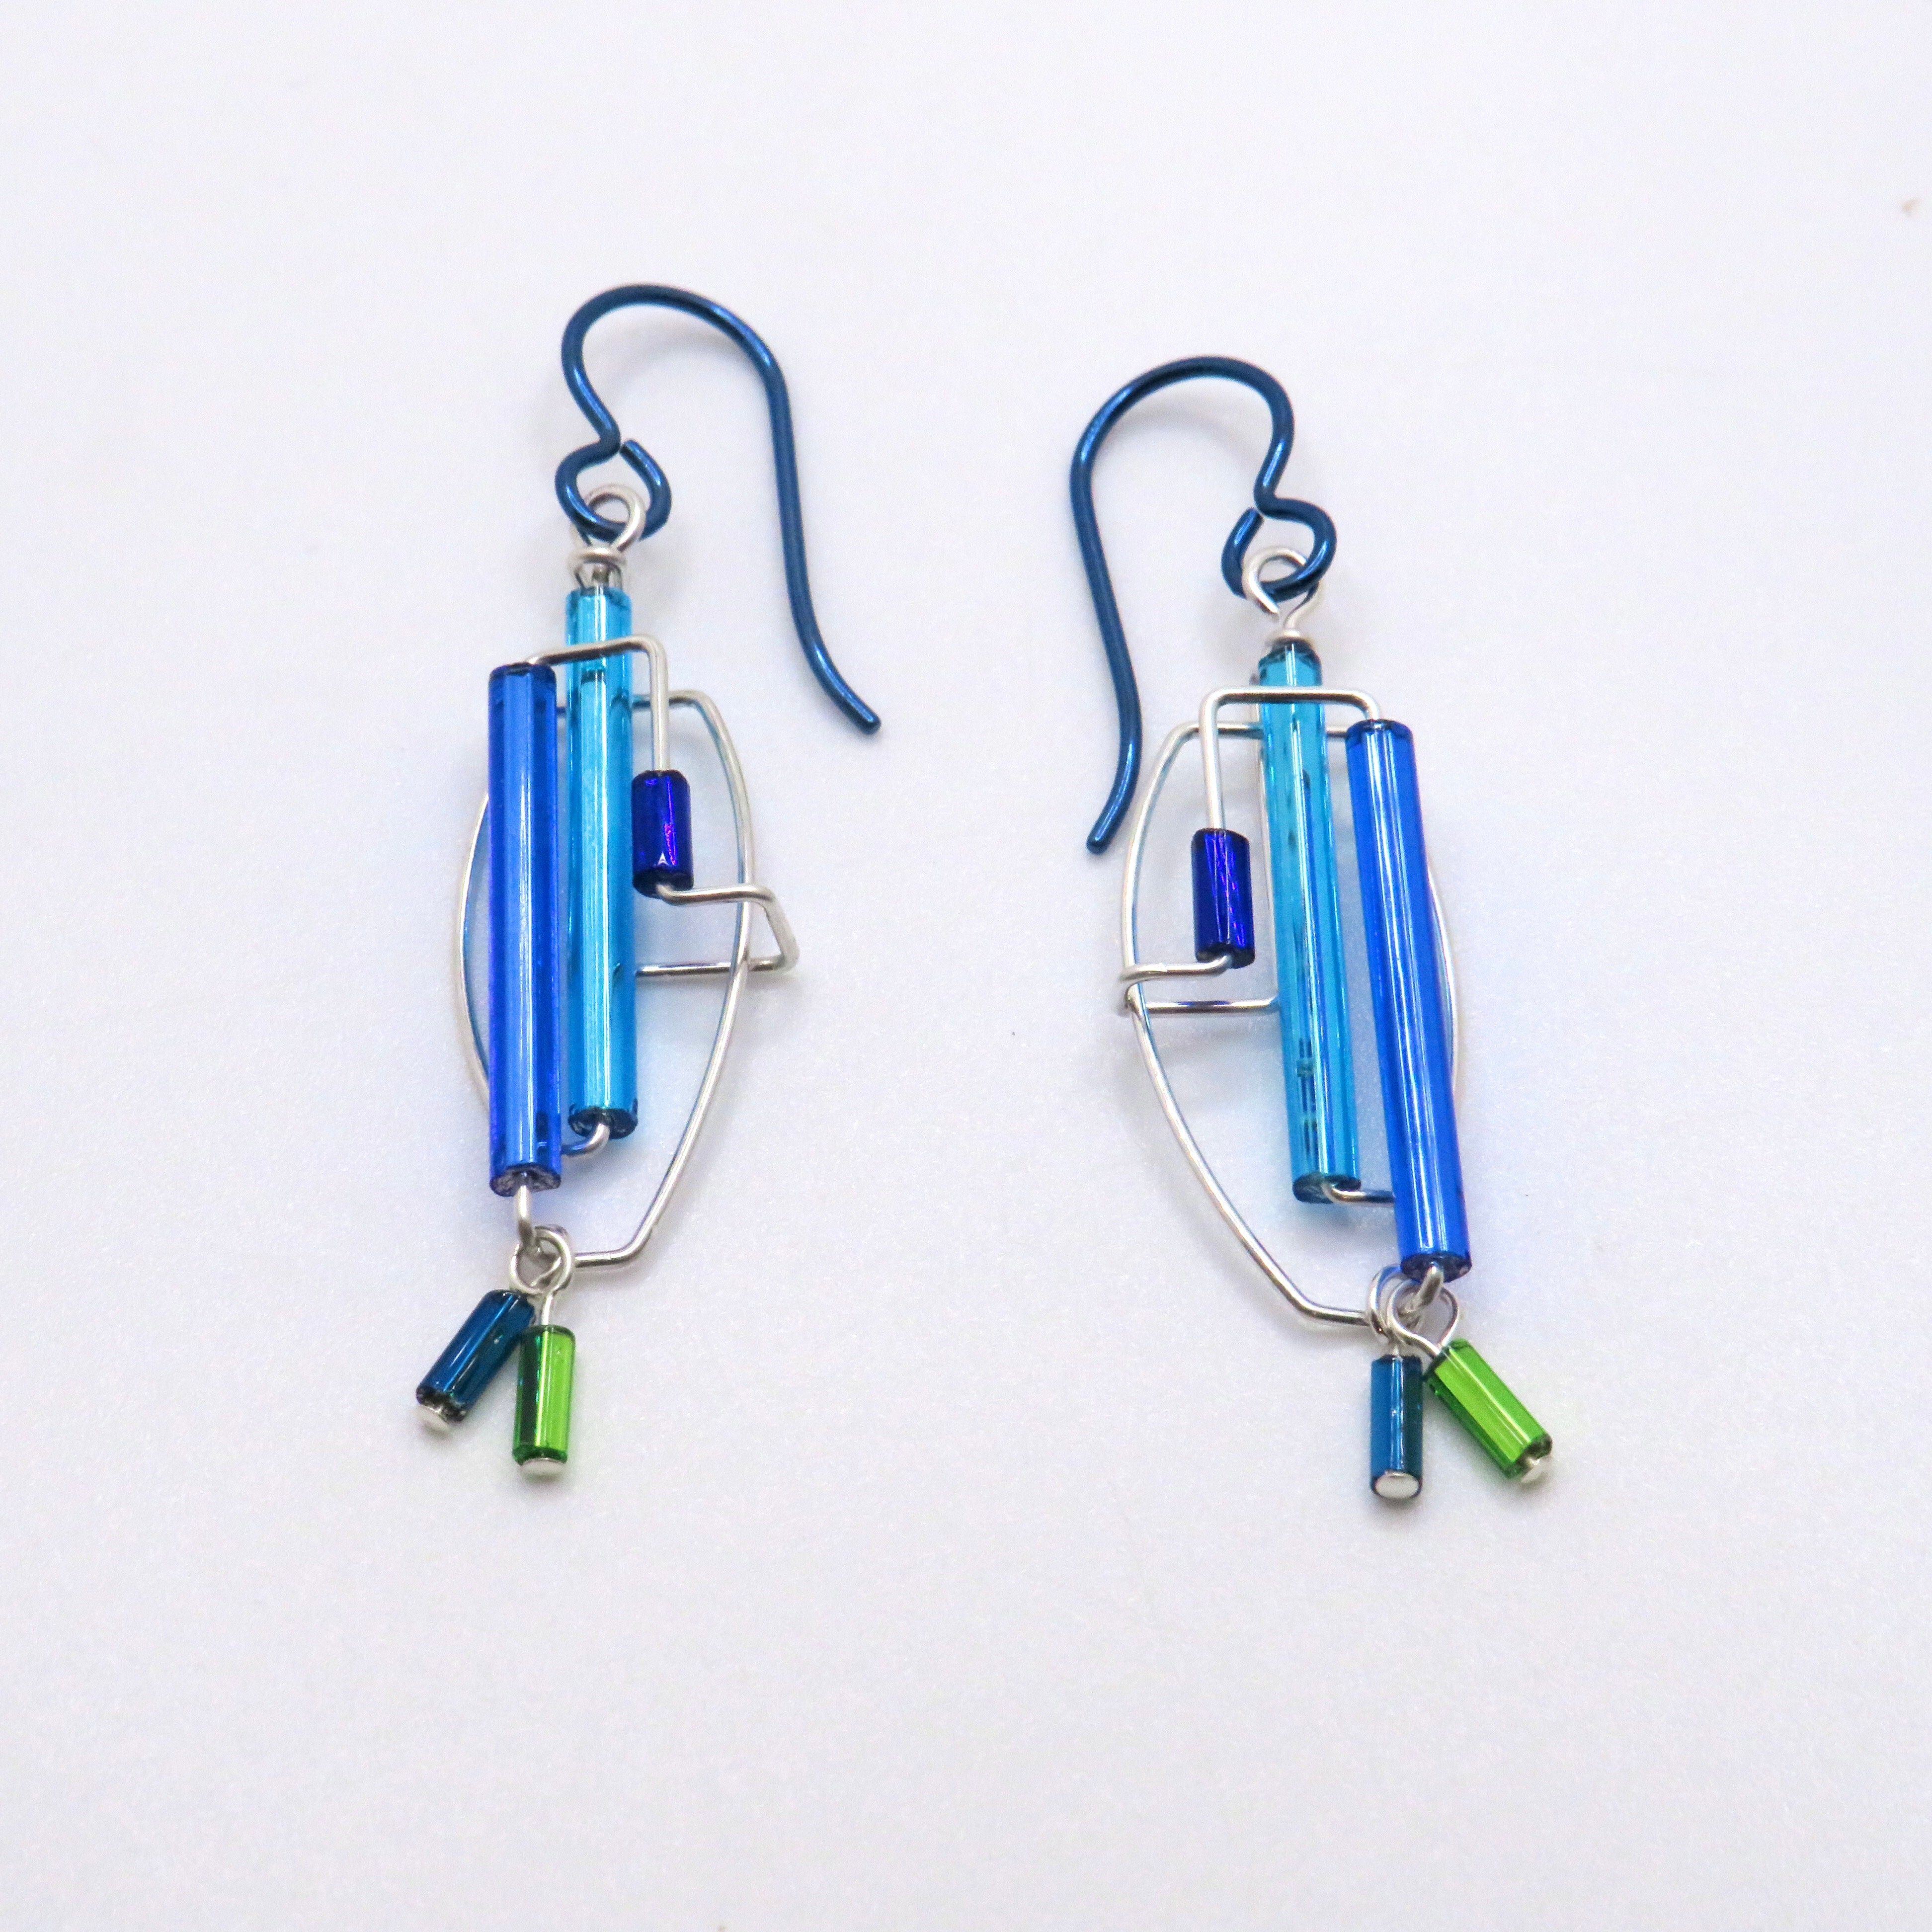 geometric wire earrings with beads